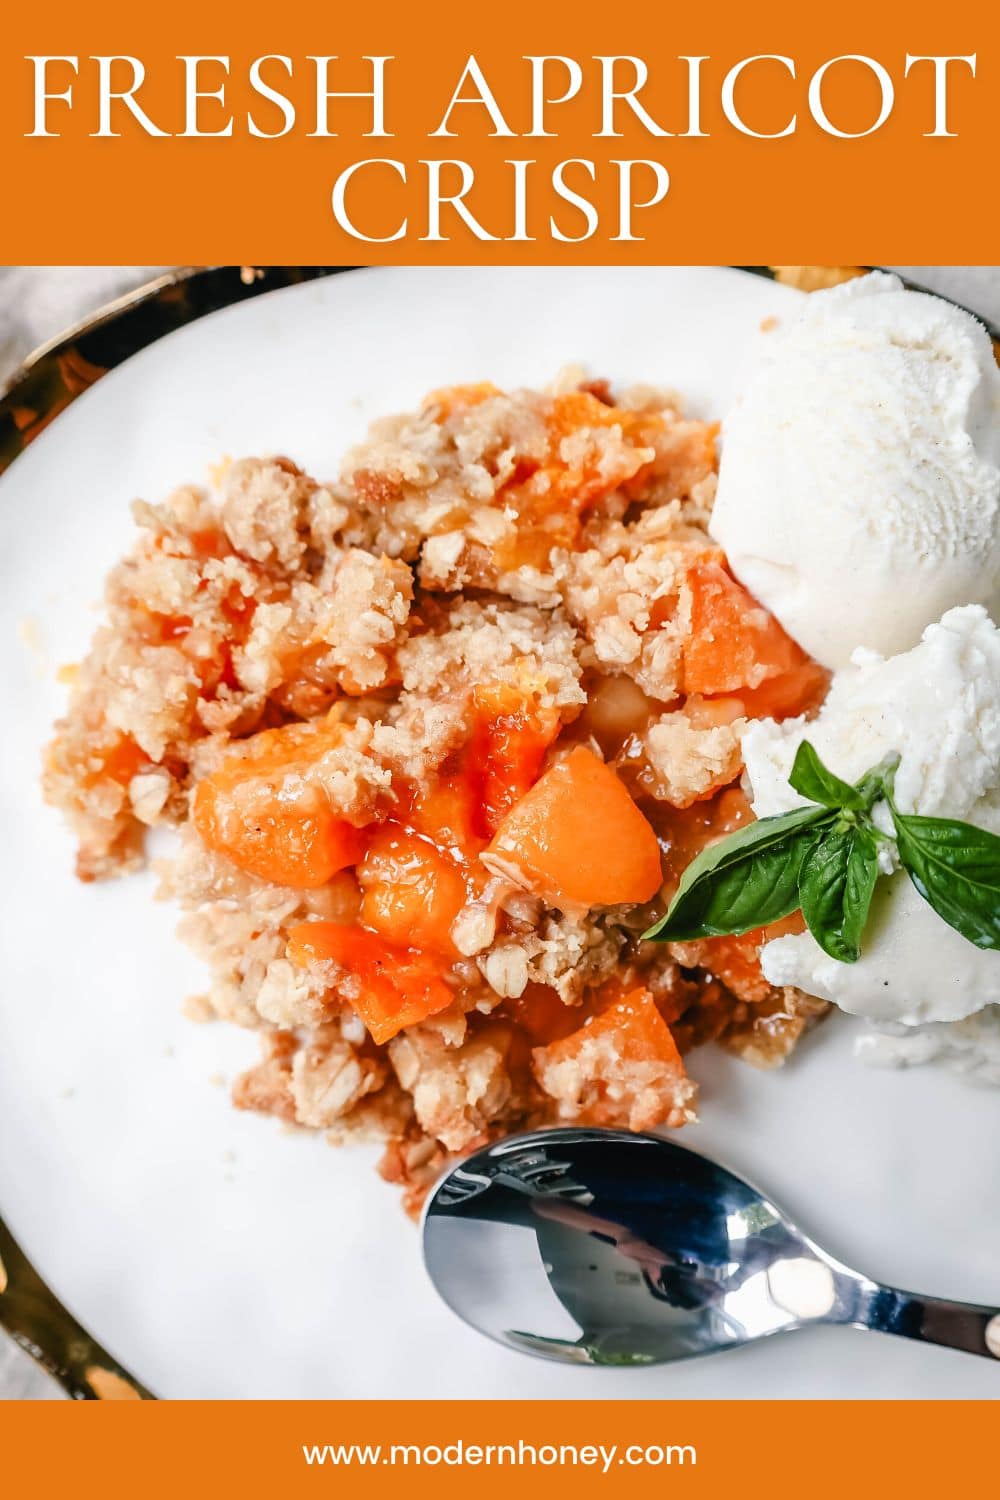 This Apricot Crisp is made with fresh apricots tossed in sugar and almond extract and topped with a homemade brown sugar oat crumble. This rustic summer dessert is served with a big scoop of vanilla bean ice cream. 